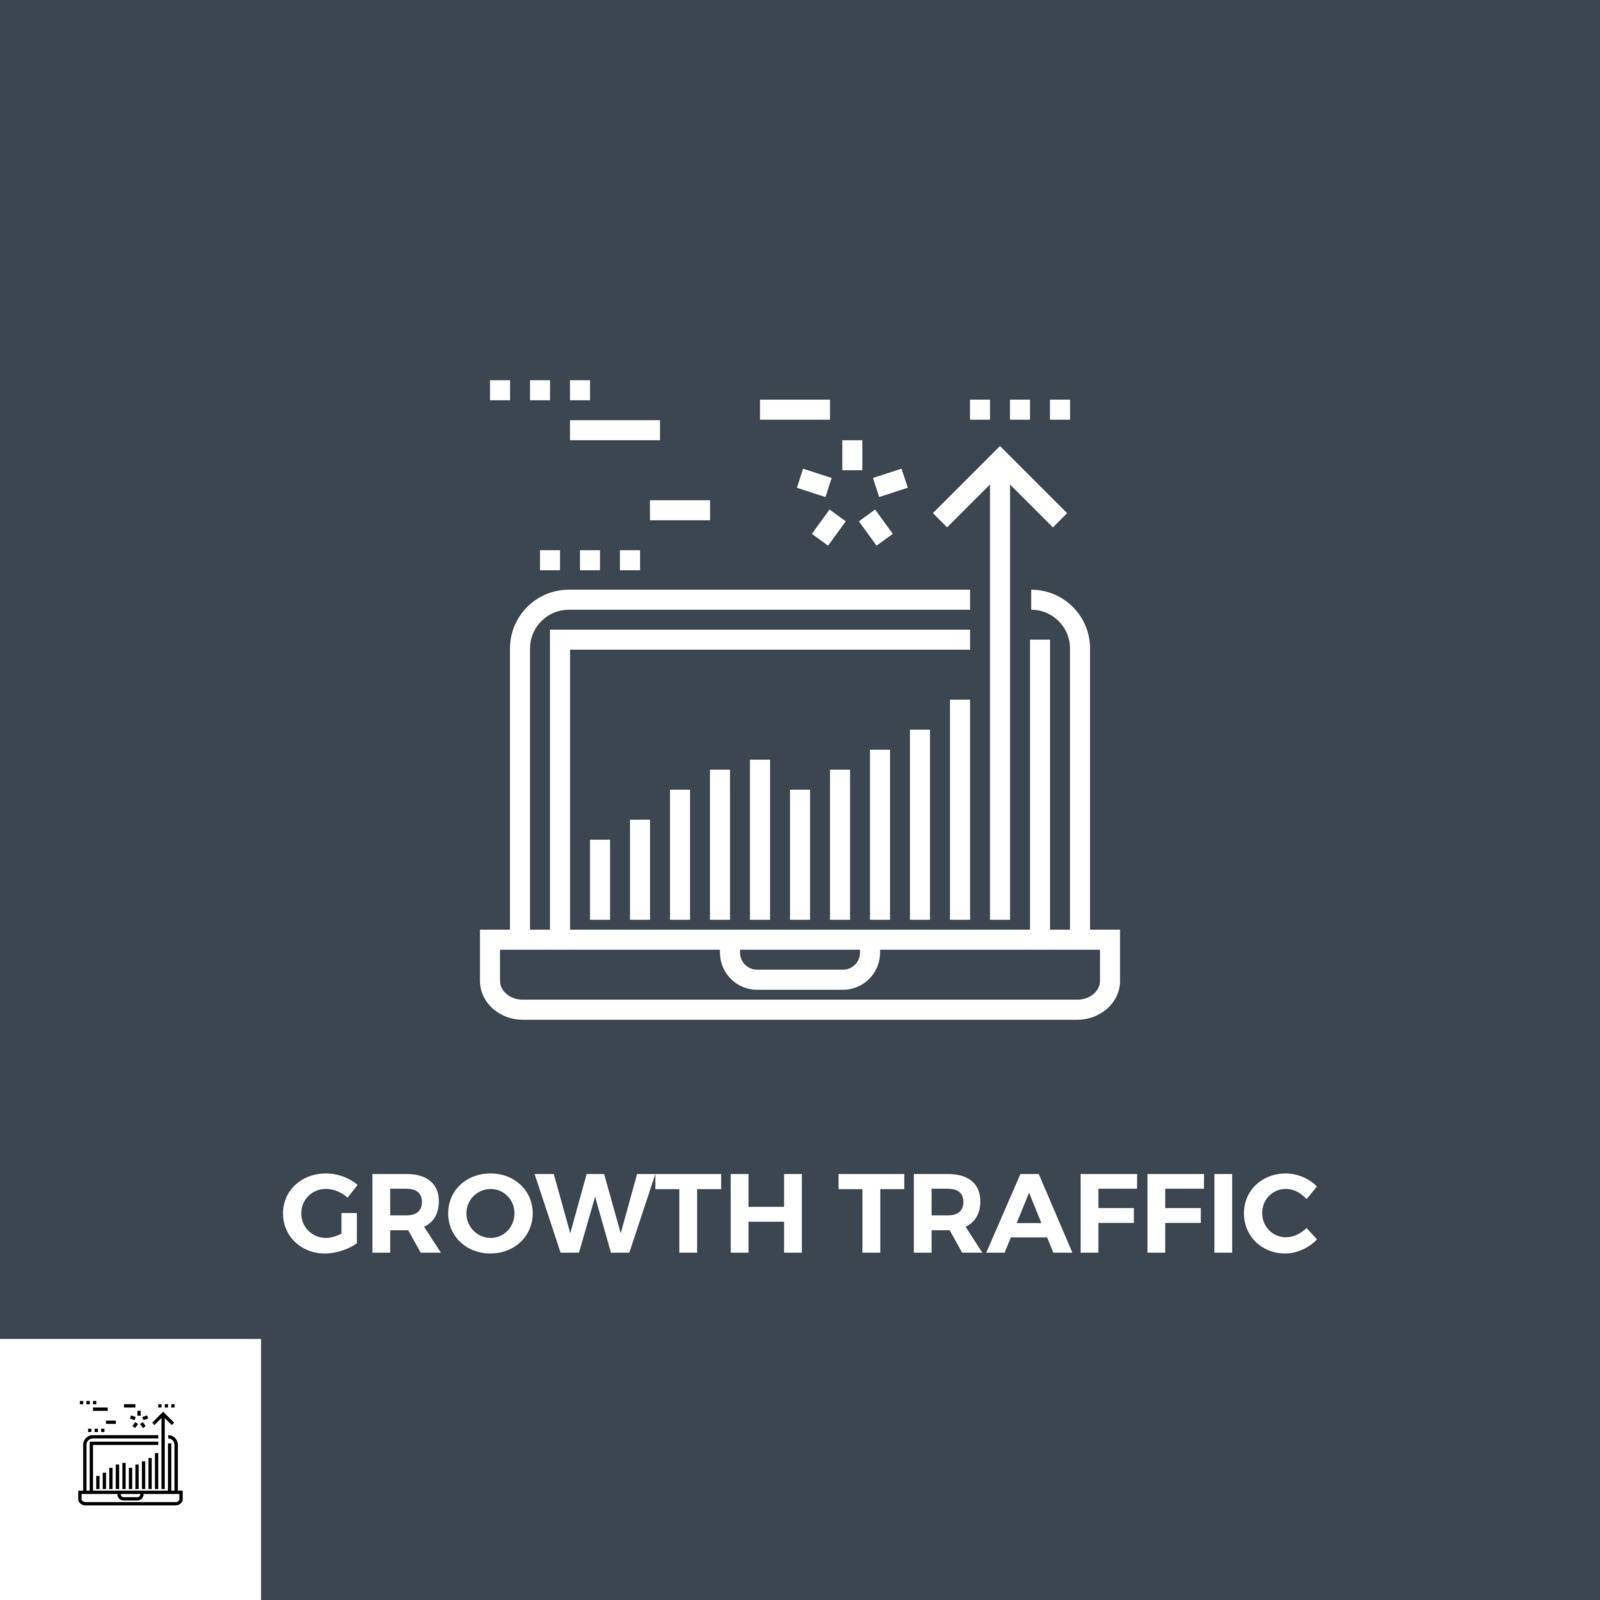 Growth Traffic Related Vector Thin Line Icon. Isolated on Black Background. Vector Illustration.